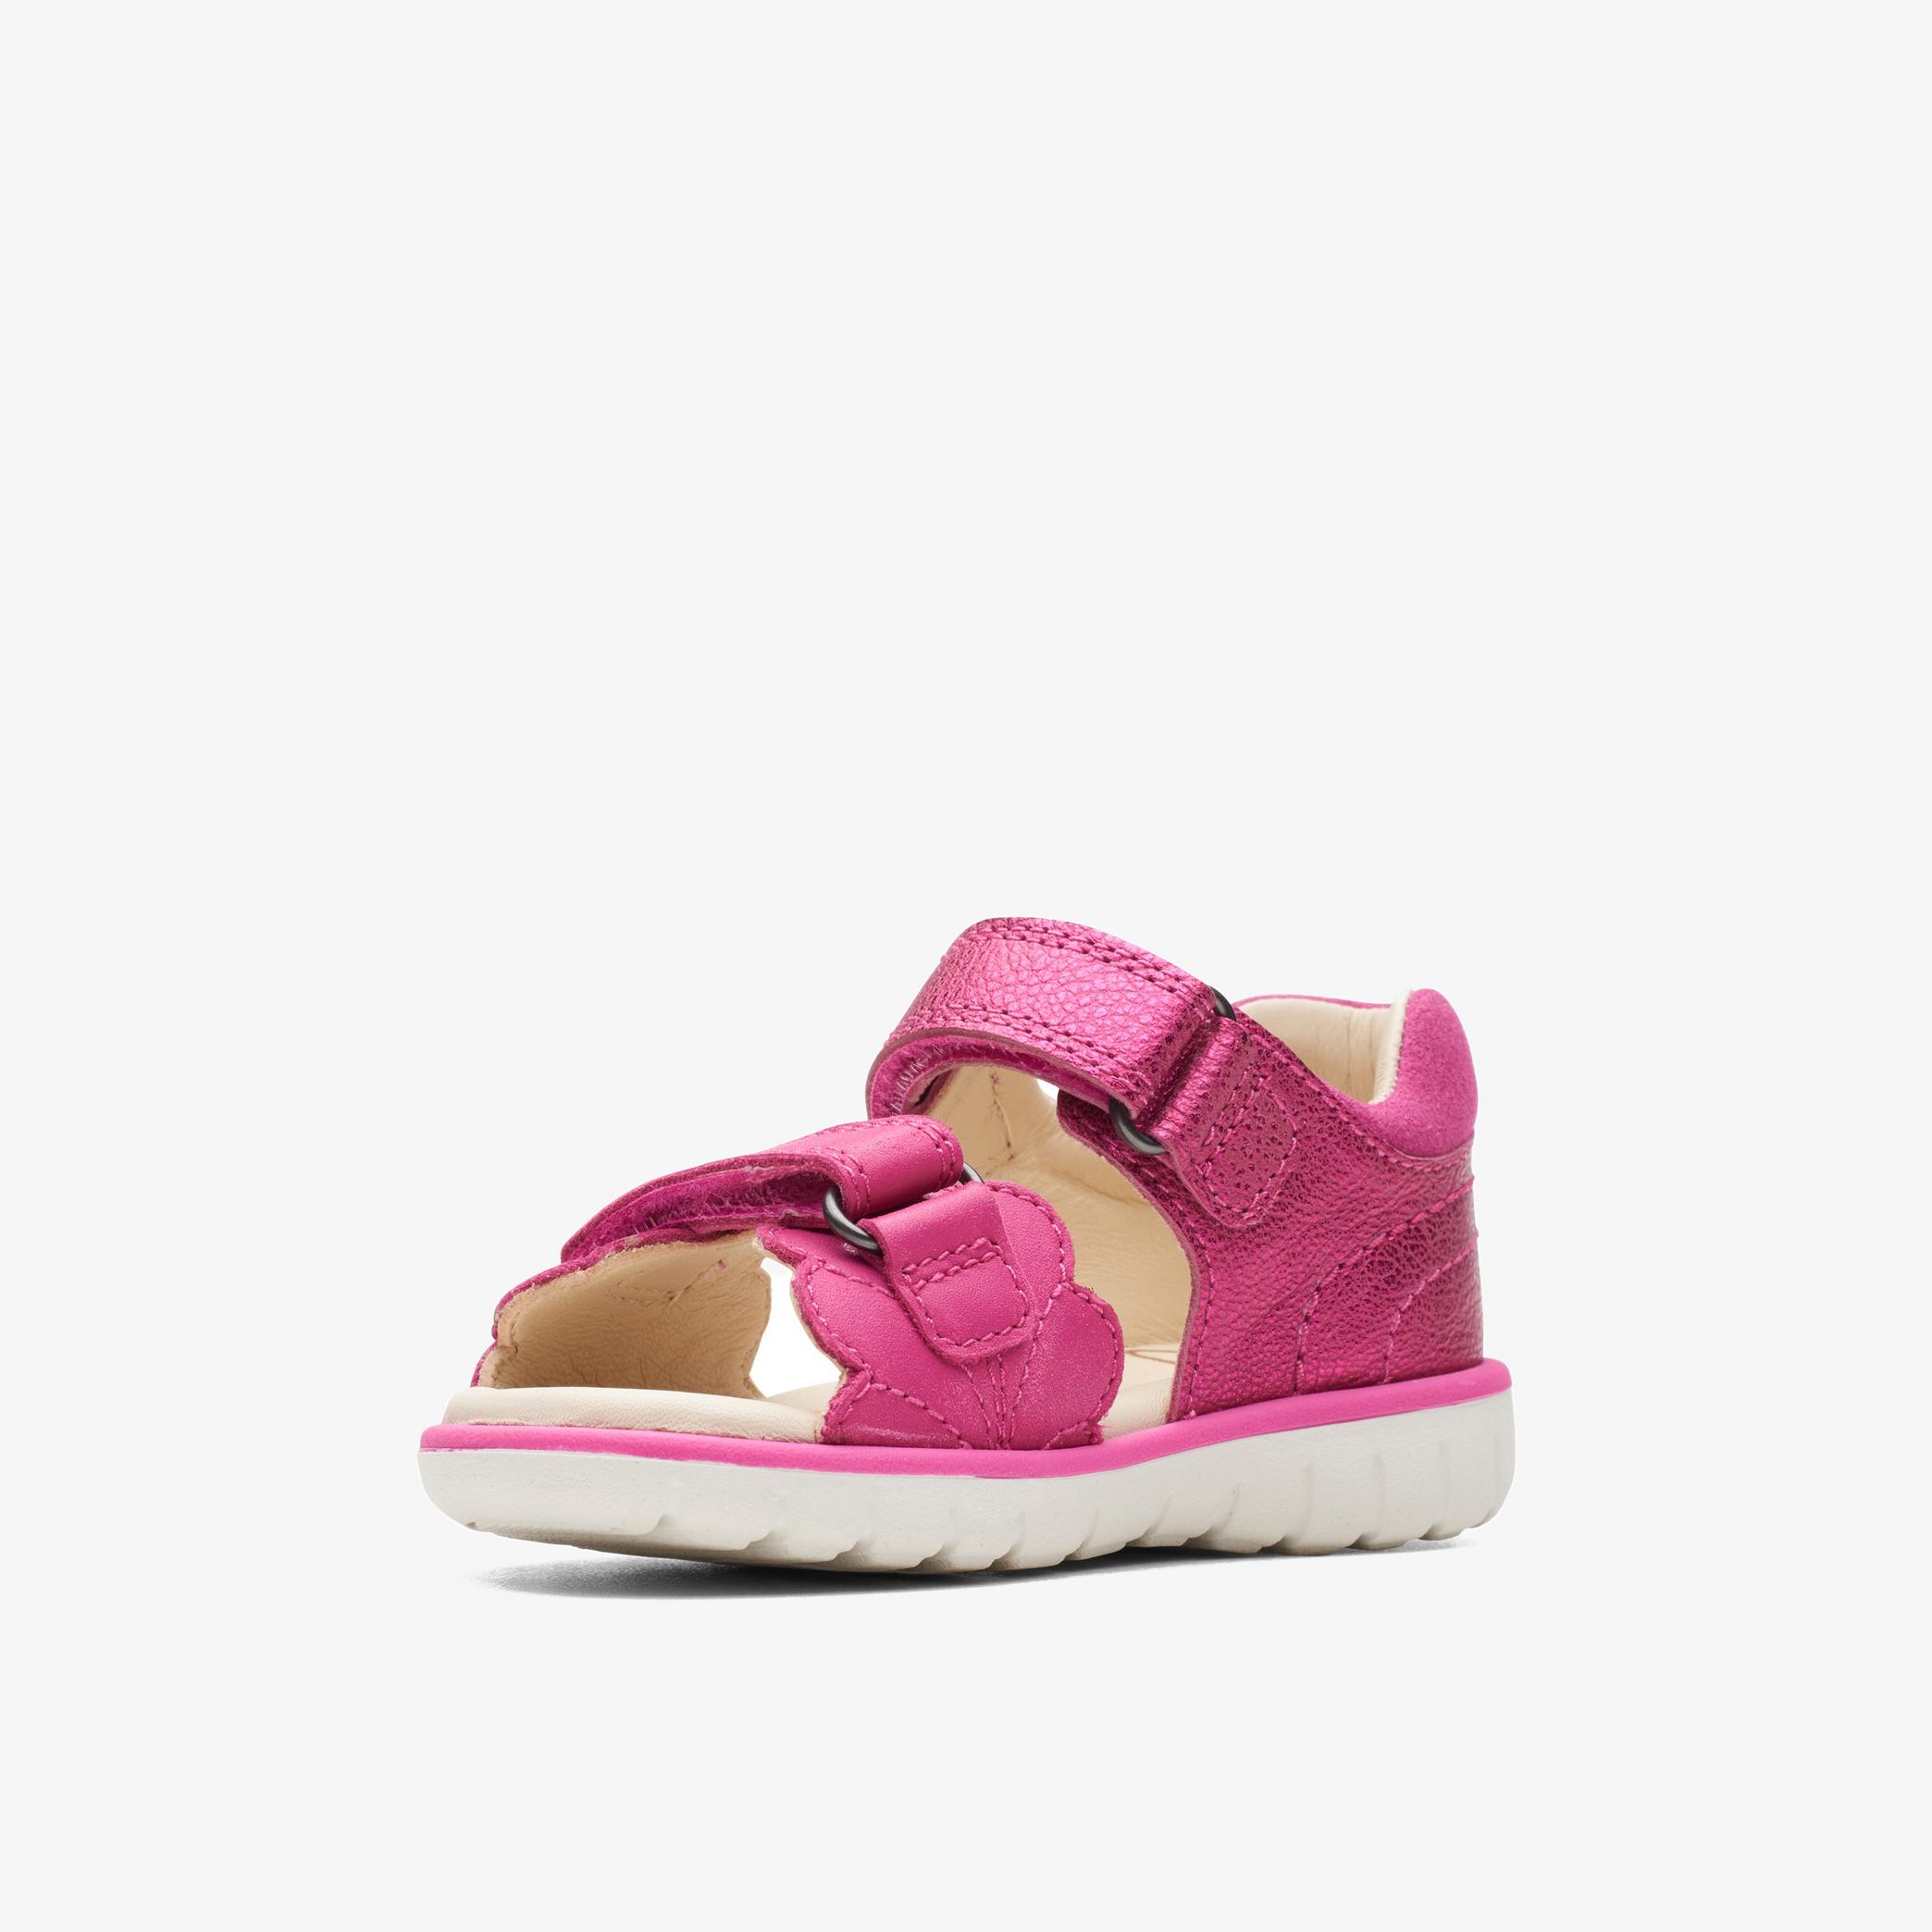 Roam Wing Toddler Pink Leather Flat Sandals, view 4 of 6